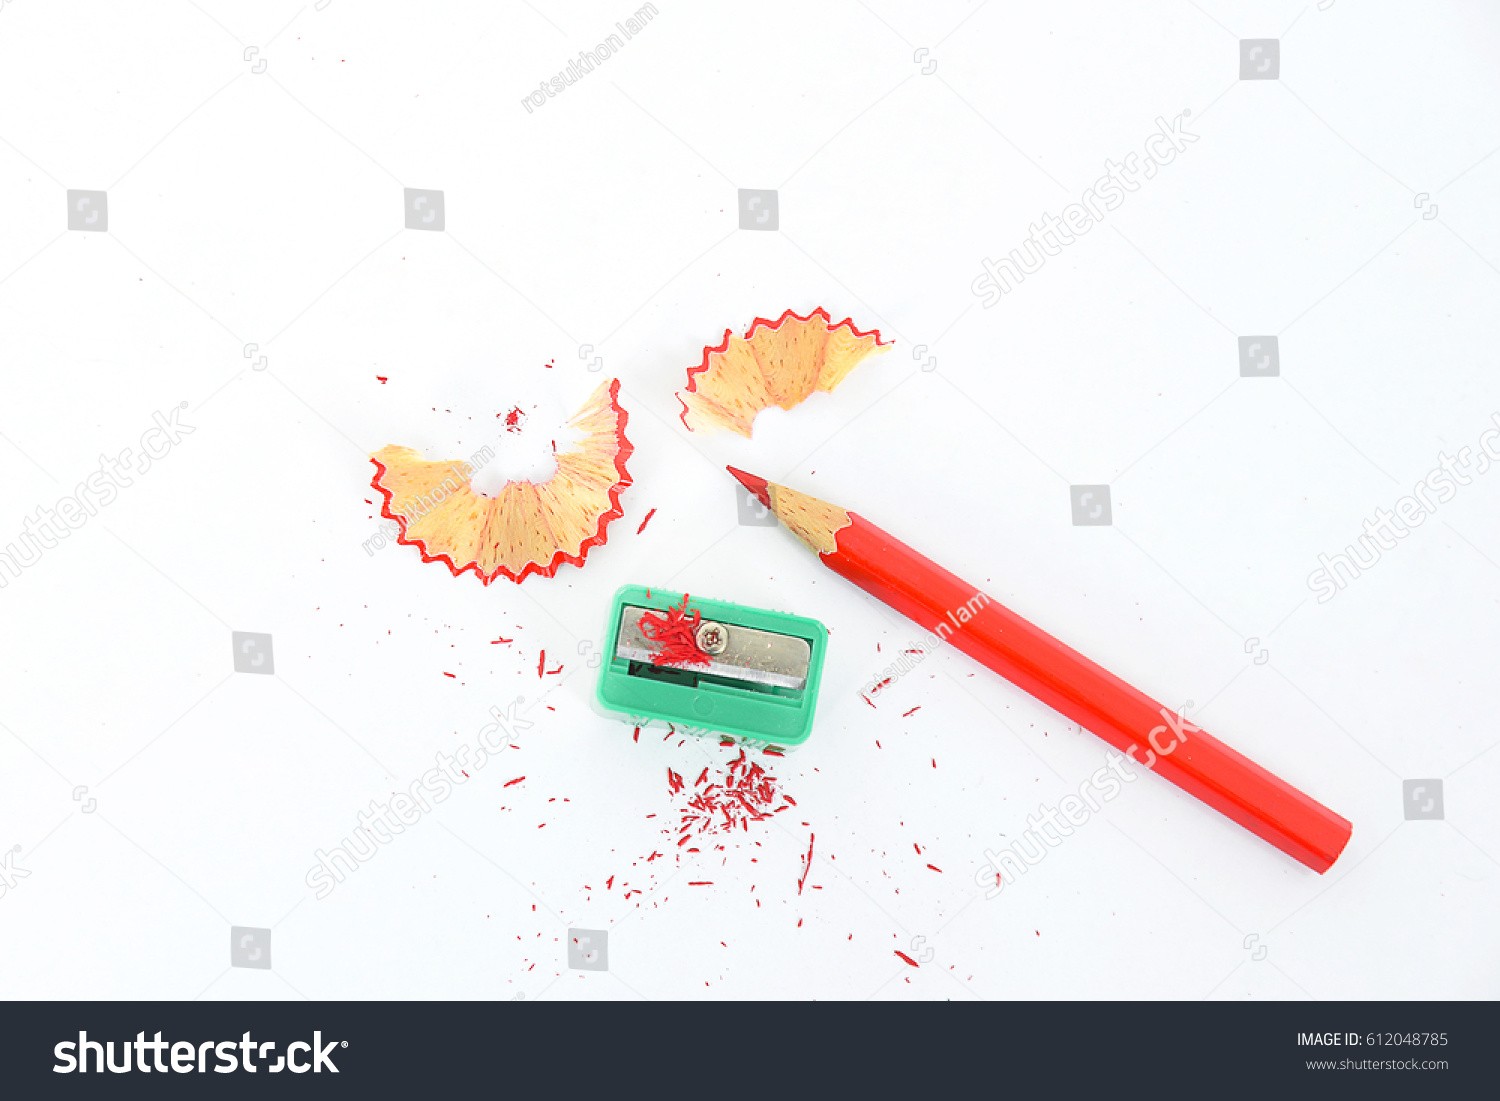 crayon or pencil and sharpener isolated on White Background #612048785